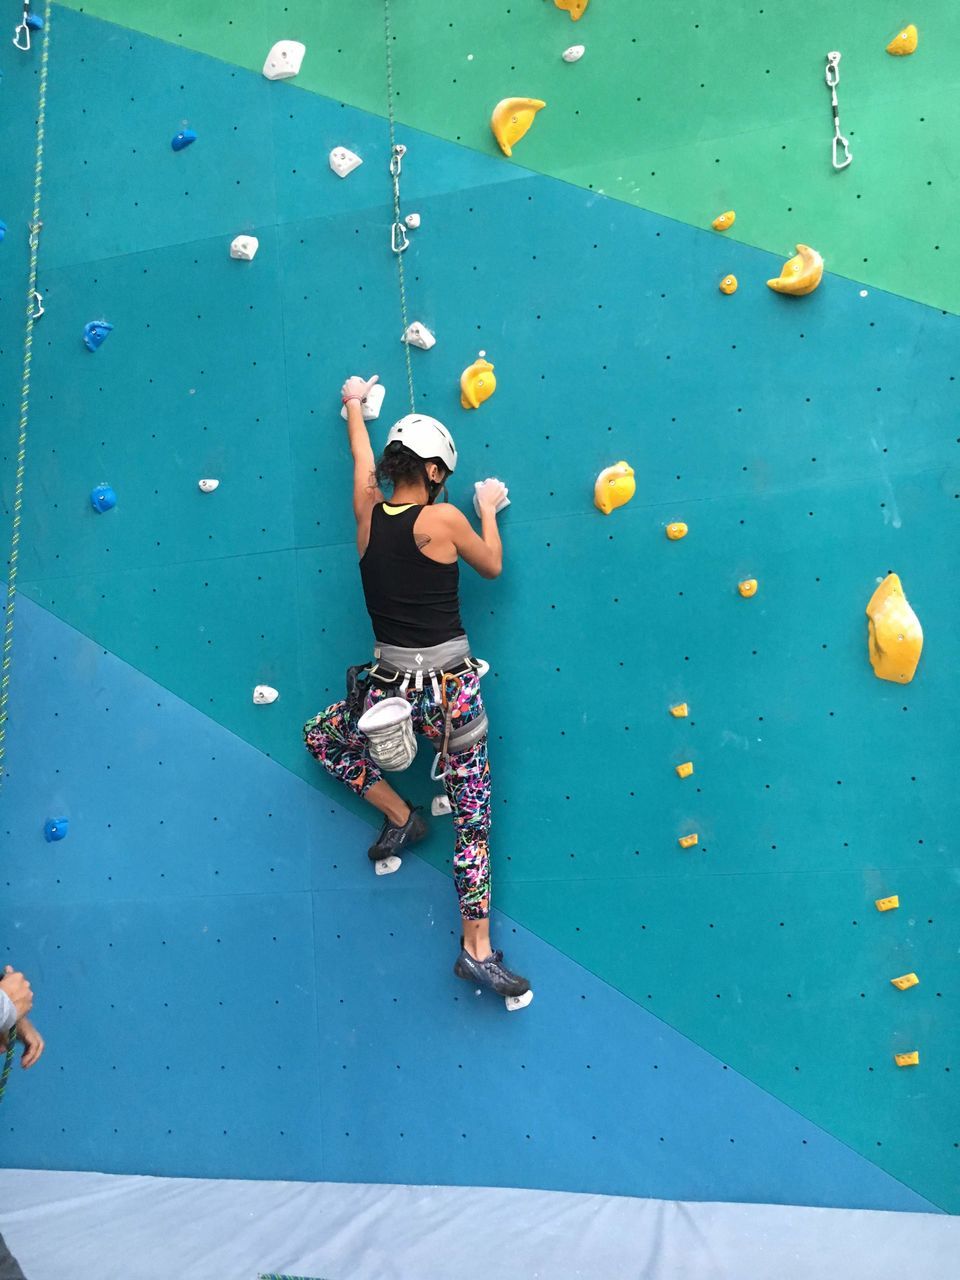 full length, sports, climbing wall, adventure, bouldering, leisure activity, climbing, one person, rock climbing, extreme sports, exercising, lifestyles, adult, activity, recreation, challenge, strength, indoors, child, vitality, men, relaxation, person, balance, skill, young adult, fun, motion, enjoyment, determination, blue, casual clothing, childhood, practicing, nature, day